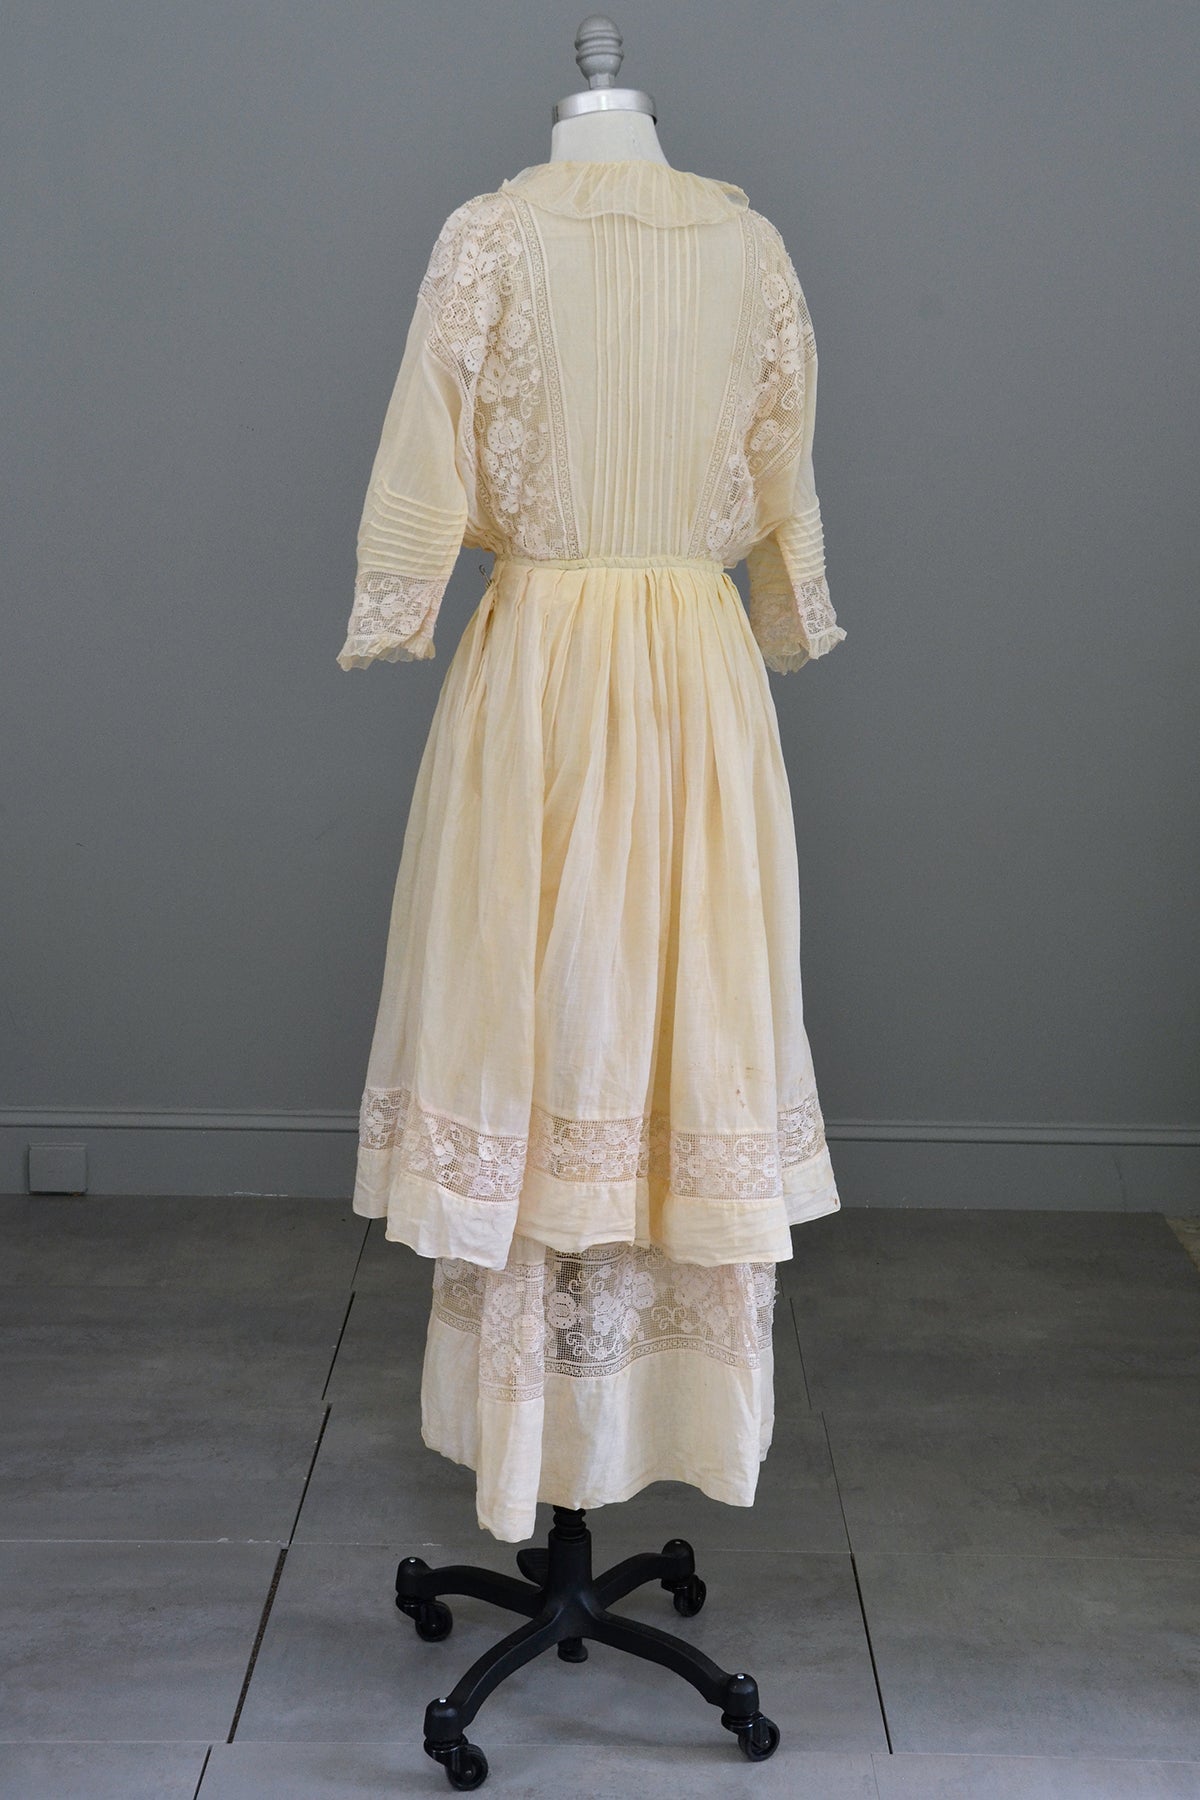 Edwardian Dress with Needlepoint Trim and Tiered Bell Skirt